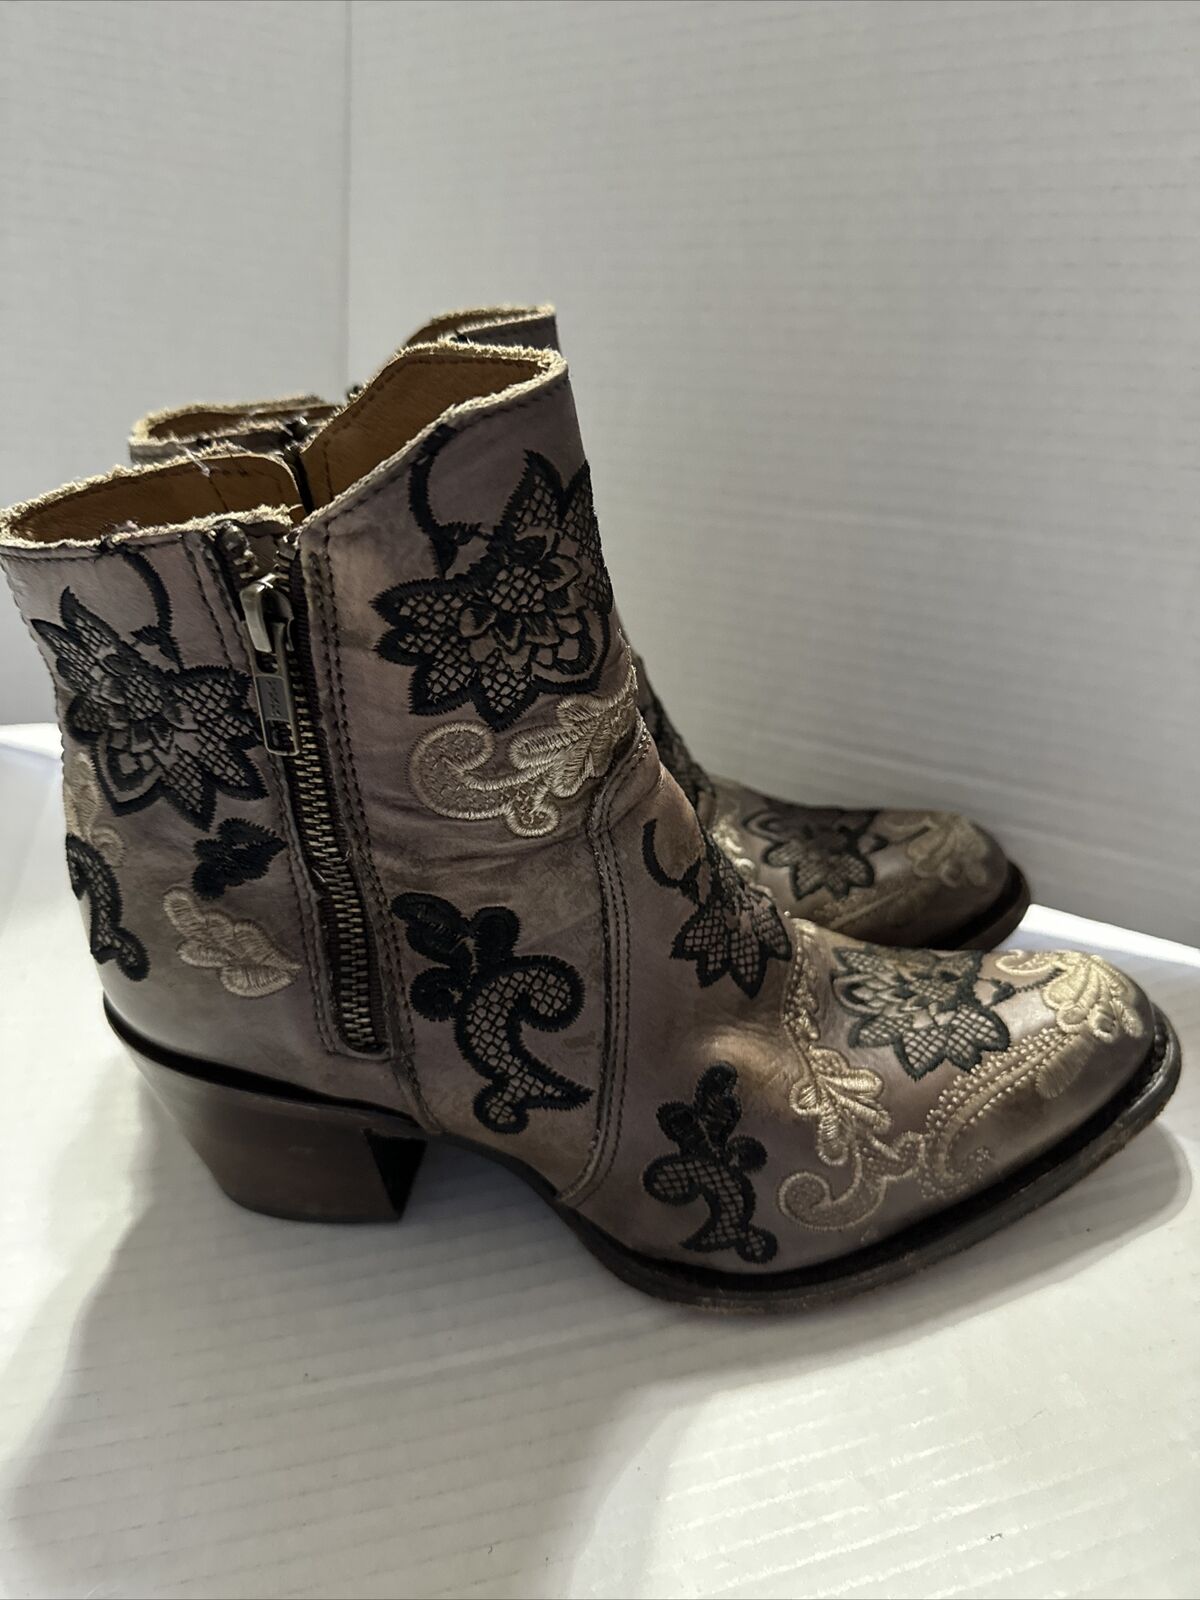 Corral Western Boots Womens Floral Embroidery Ankle 8 M Brown C3272